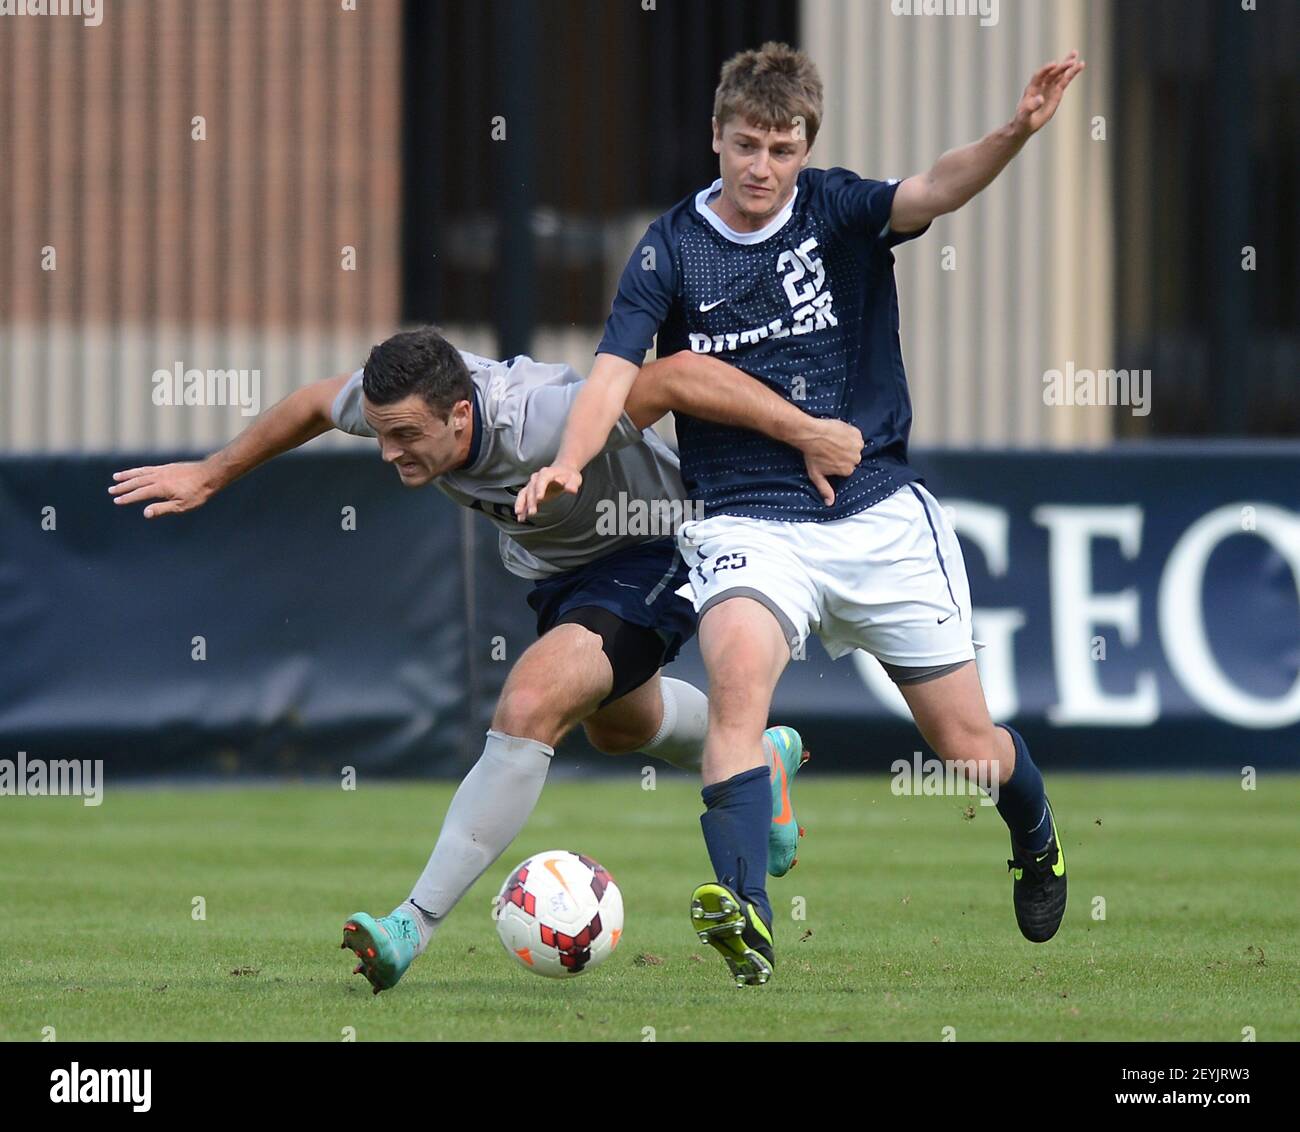 Georgetown forward Brandon Allen (10), left, and Butler defender Jordan (25) battle for the ball during first-half action at Shaw Field in Washington, D.C., Saturday, October 19, 2013. Georgetown defeated Butler,